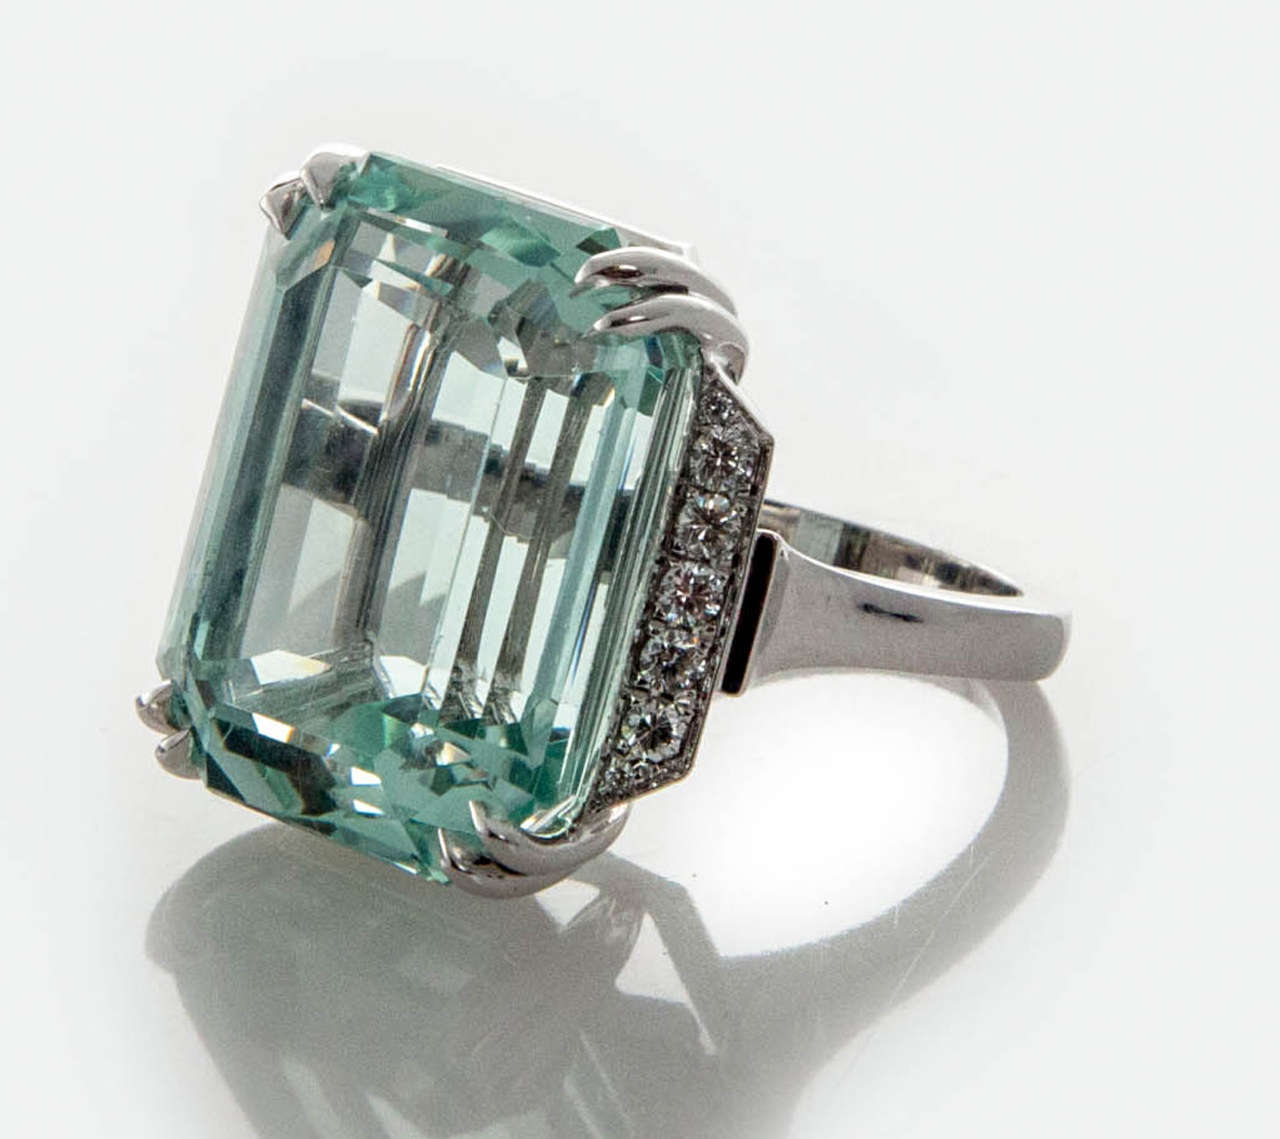 Fantastic Art Deco Emerald step cut natural Aqua ring Circa 1940. Looks even bigger than its 36.50ct size because of the distinctive step cutting. Heavy Platinum setting in simple deco style. This greenish blue color with small natural inclusions is